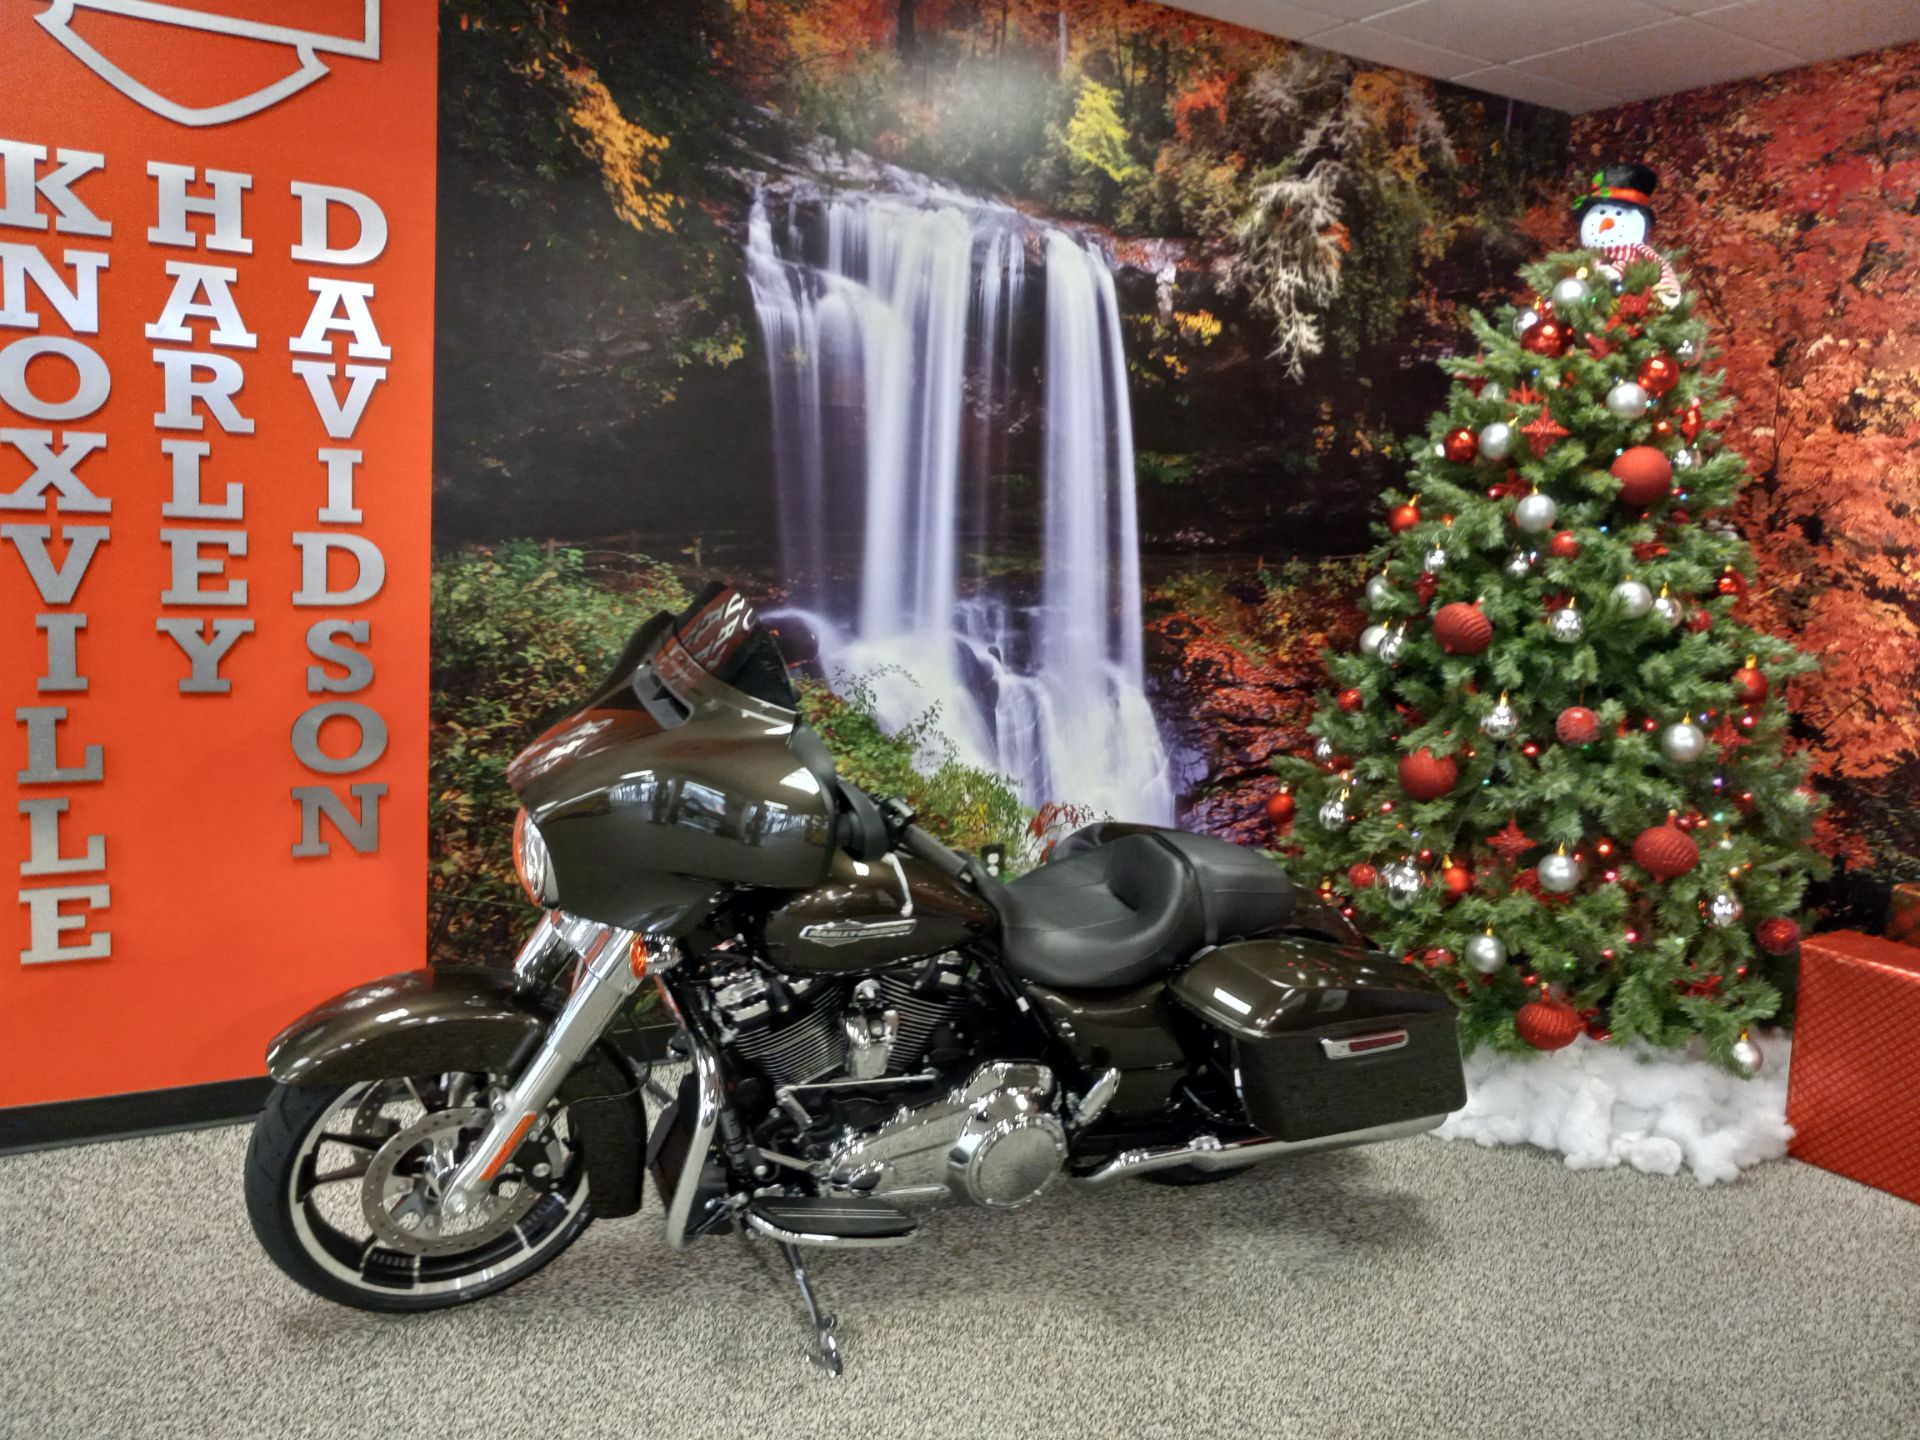 2021 Harley-Davidson Street Glide® in Knoxville, Tennessee - Photo 1